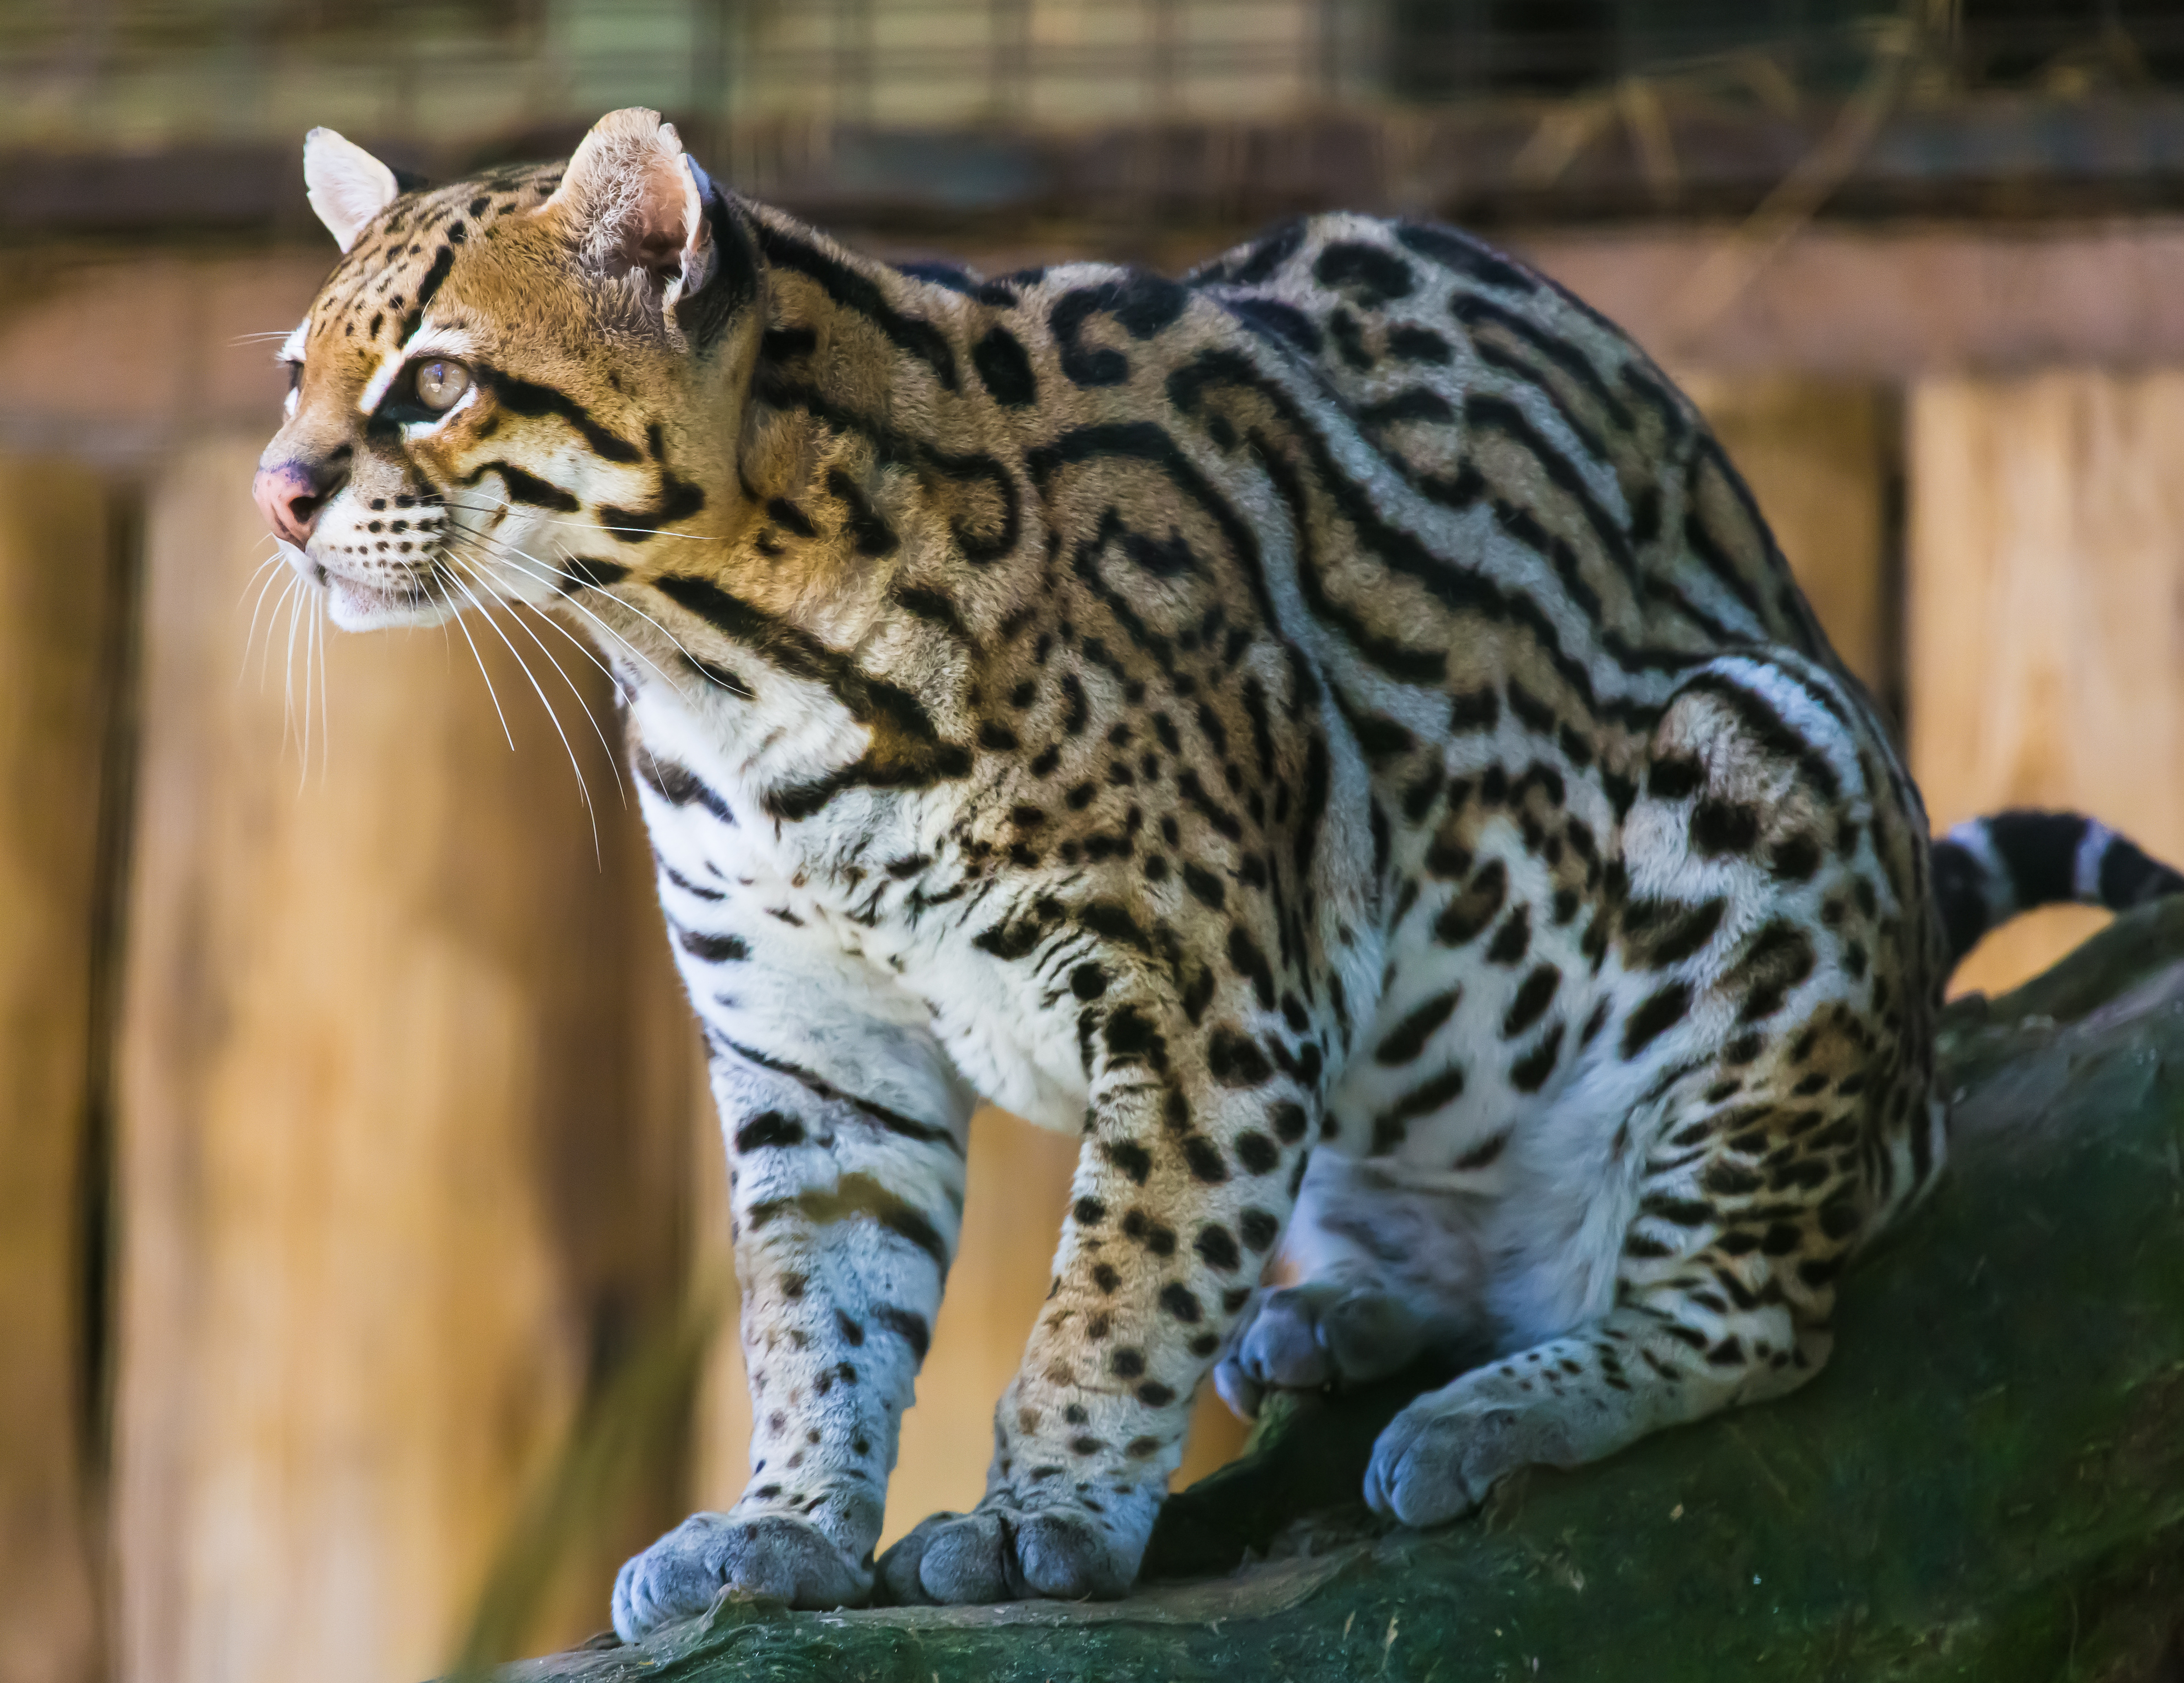 Where can I find an ocelot cat?